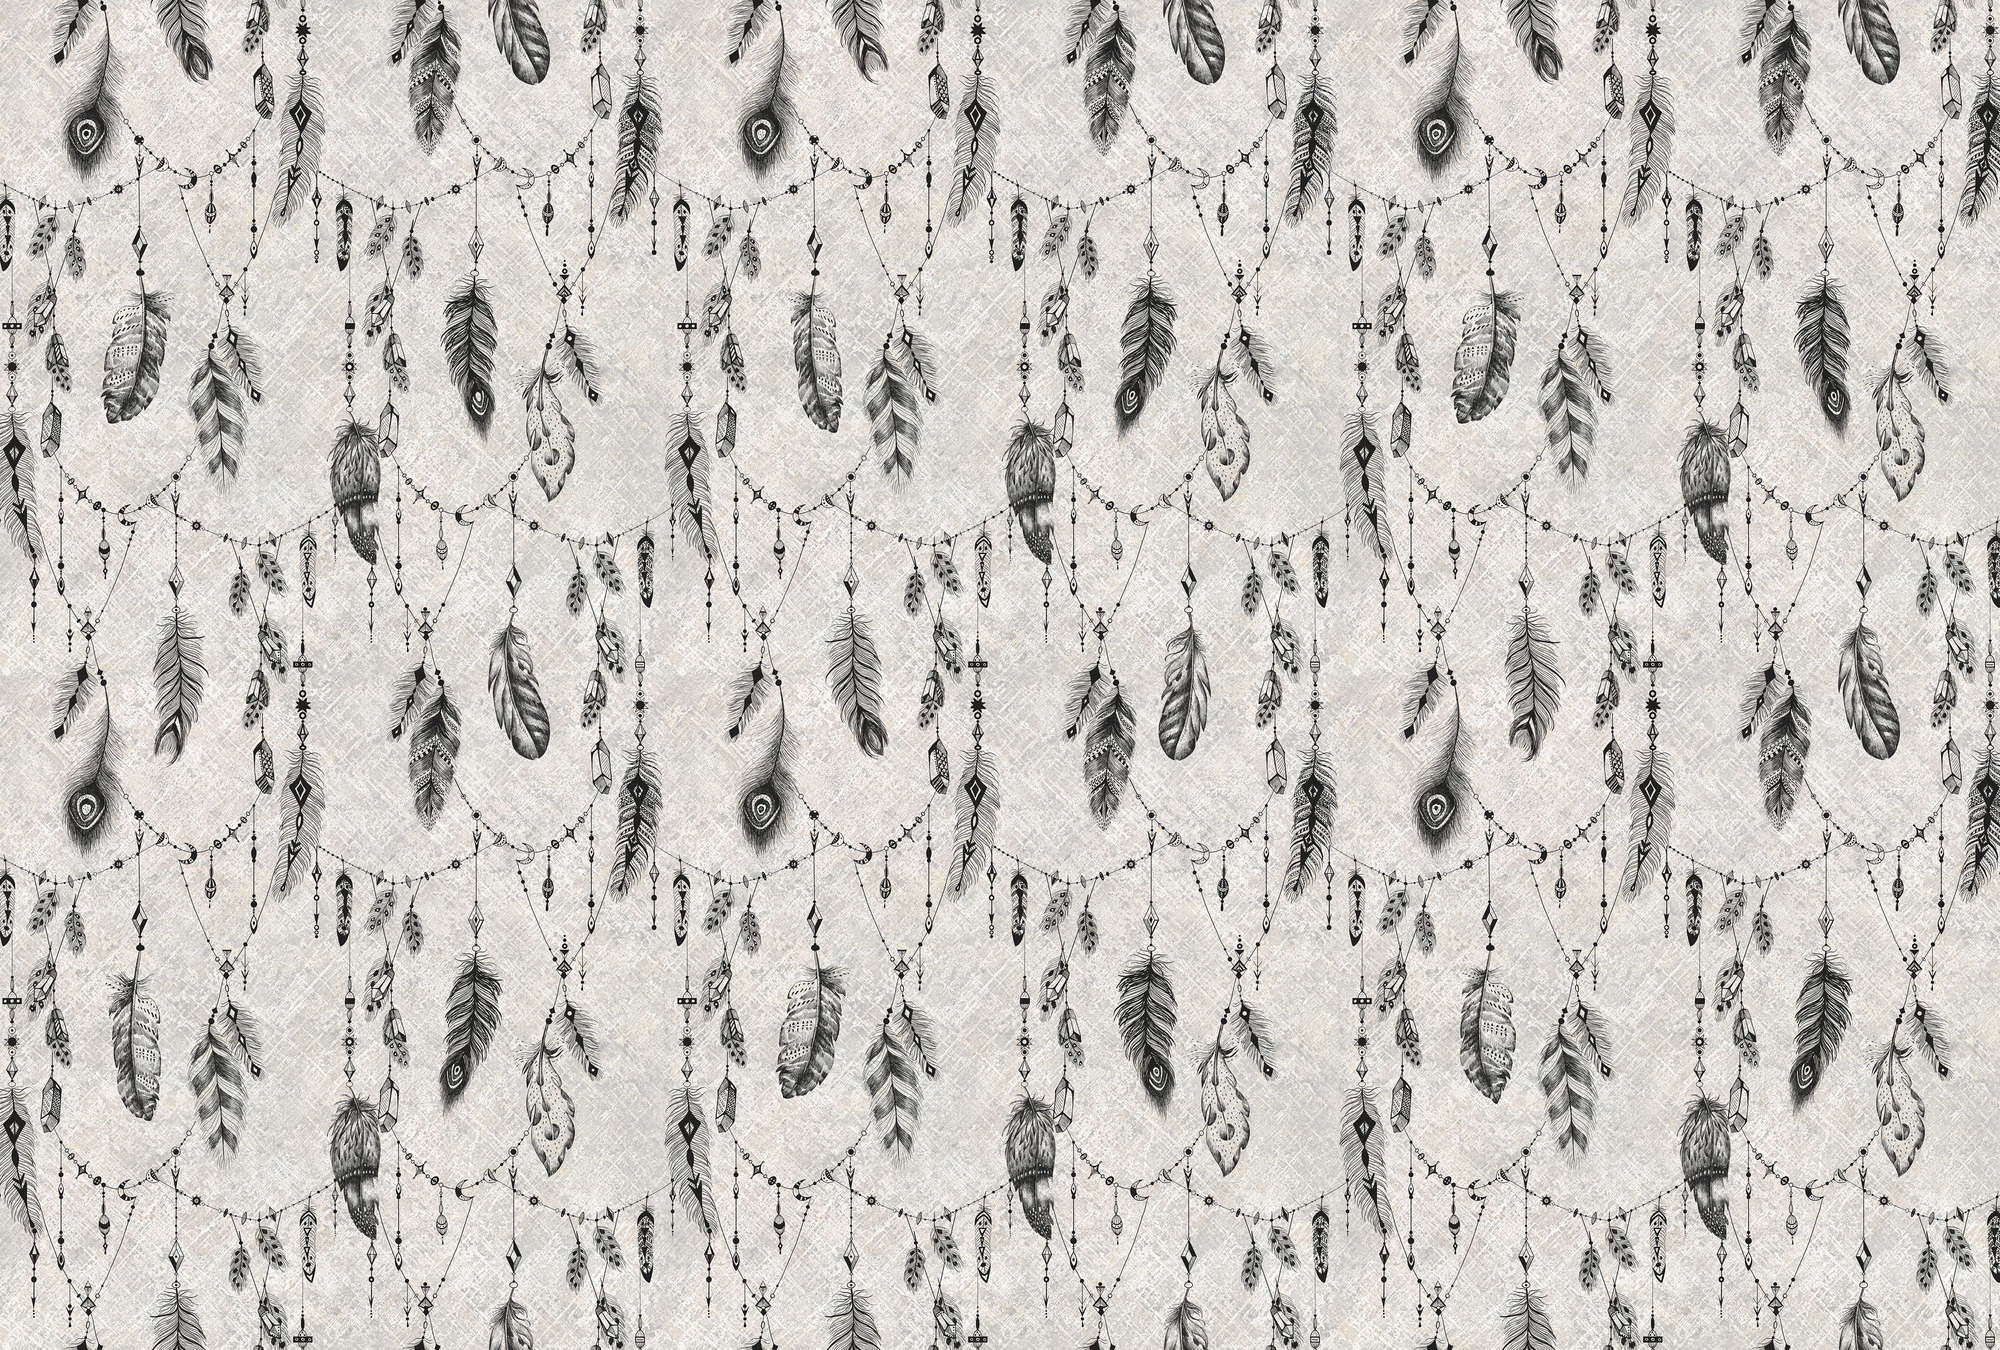             Boho photo wallpaper with feathers & linen look - black, grey
        